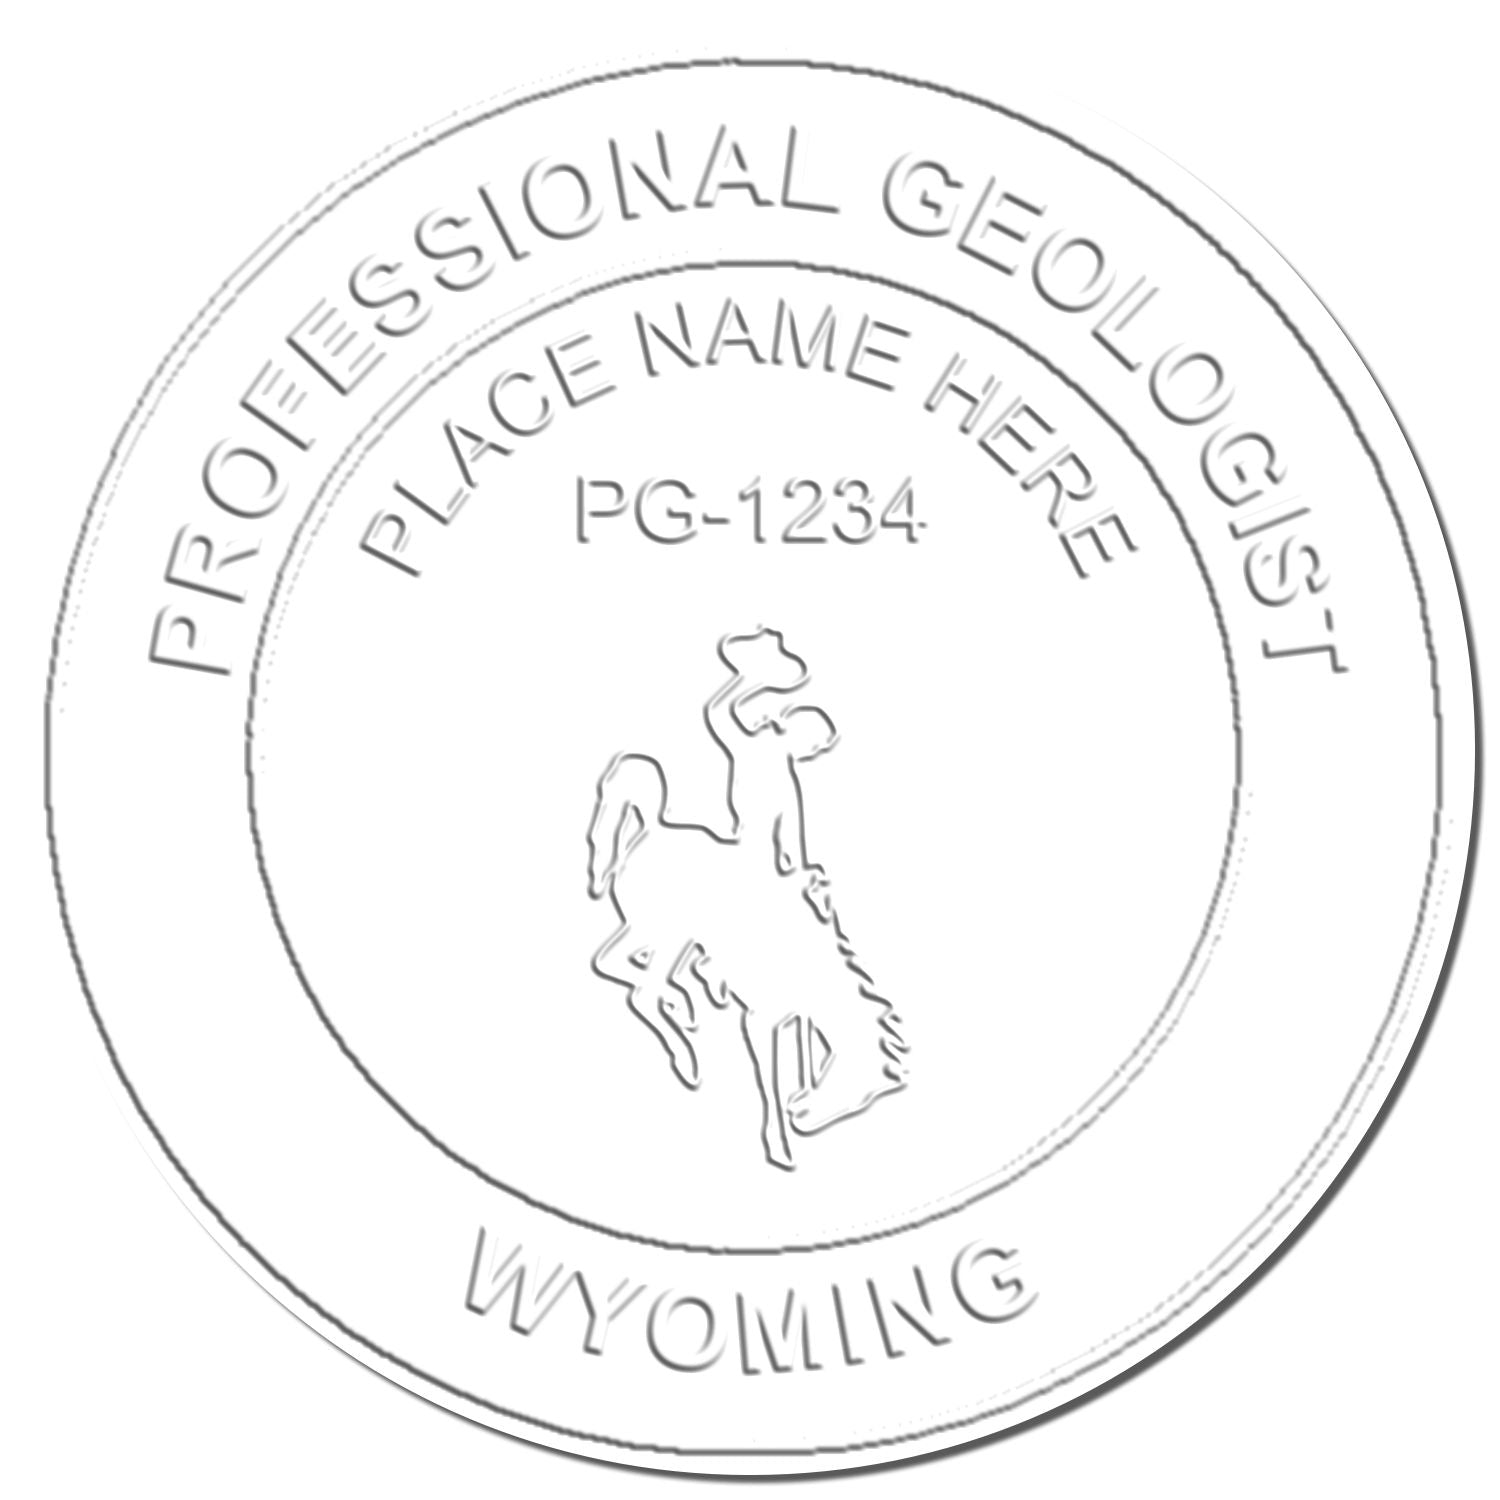 The main image for the Wyoming Geologist Desk Seal depicting a sample of the imprint and imprint sample